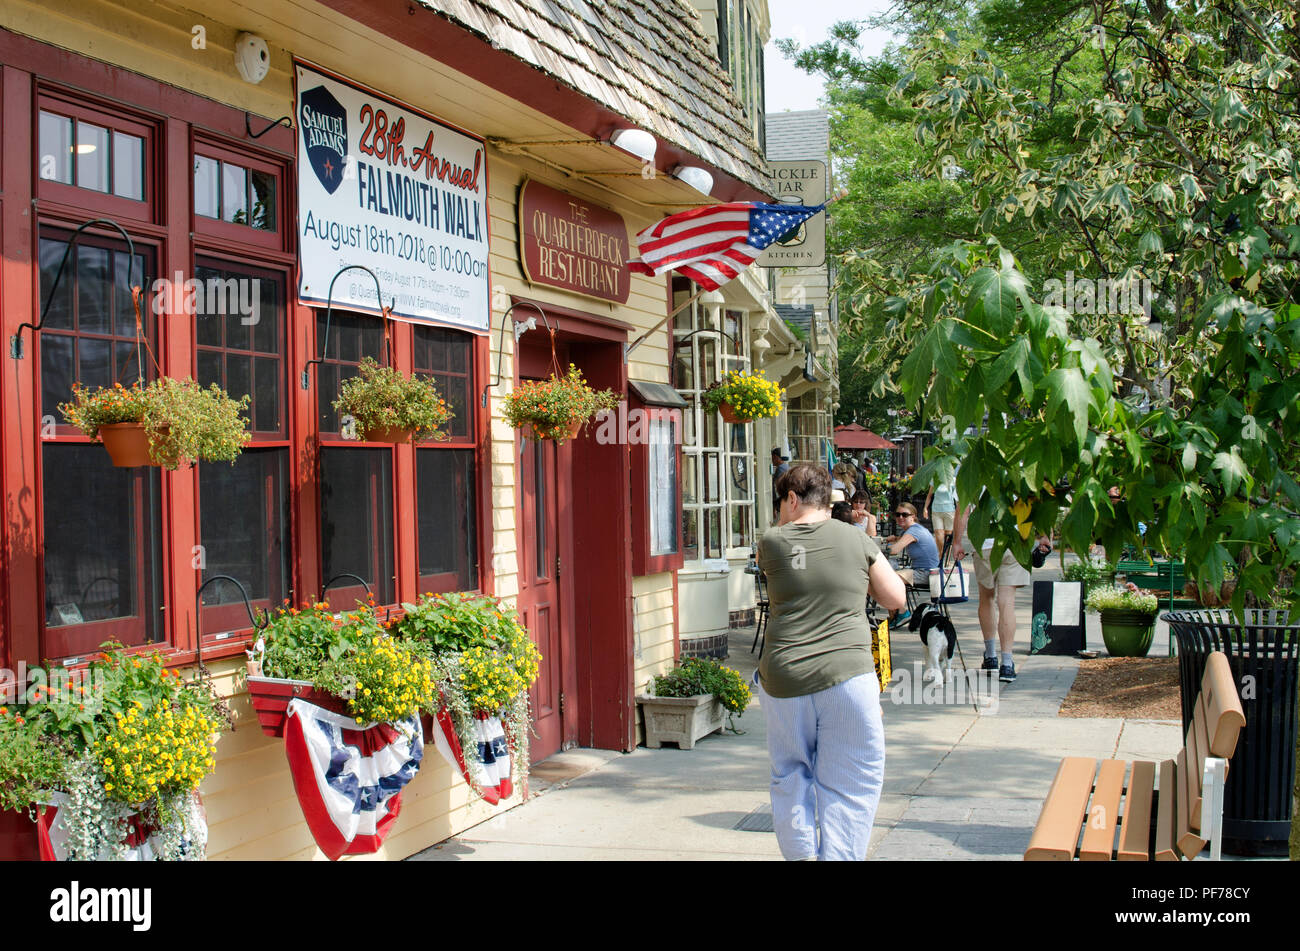 Downtown Falmouth, Cape Cod, Massachusetts summer street scene with people outside the Quarterdeck restaurant Stock Photo